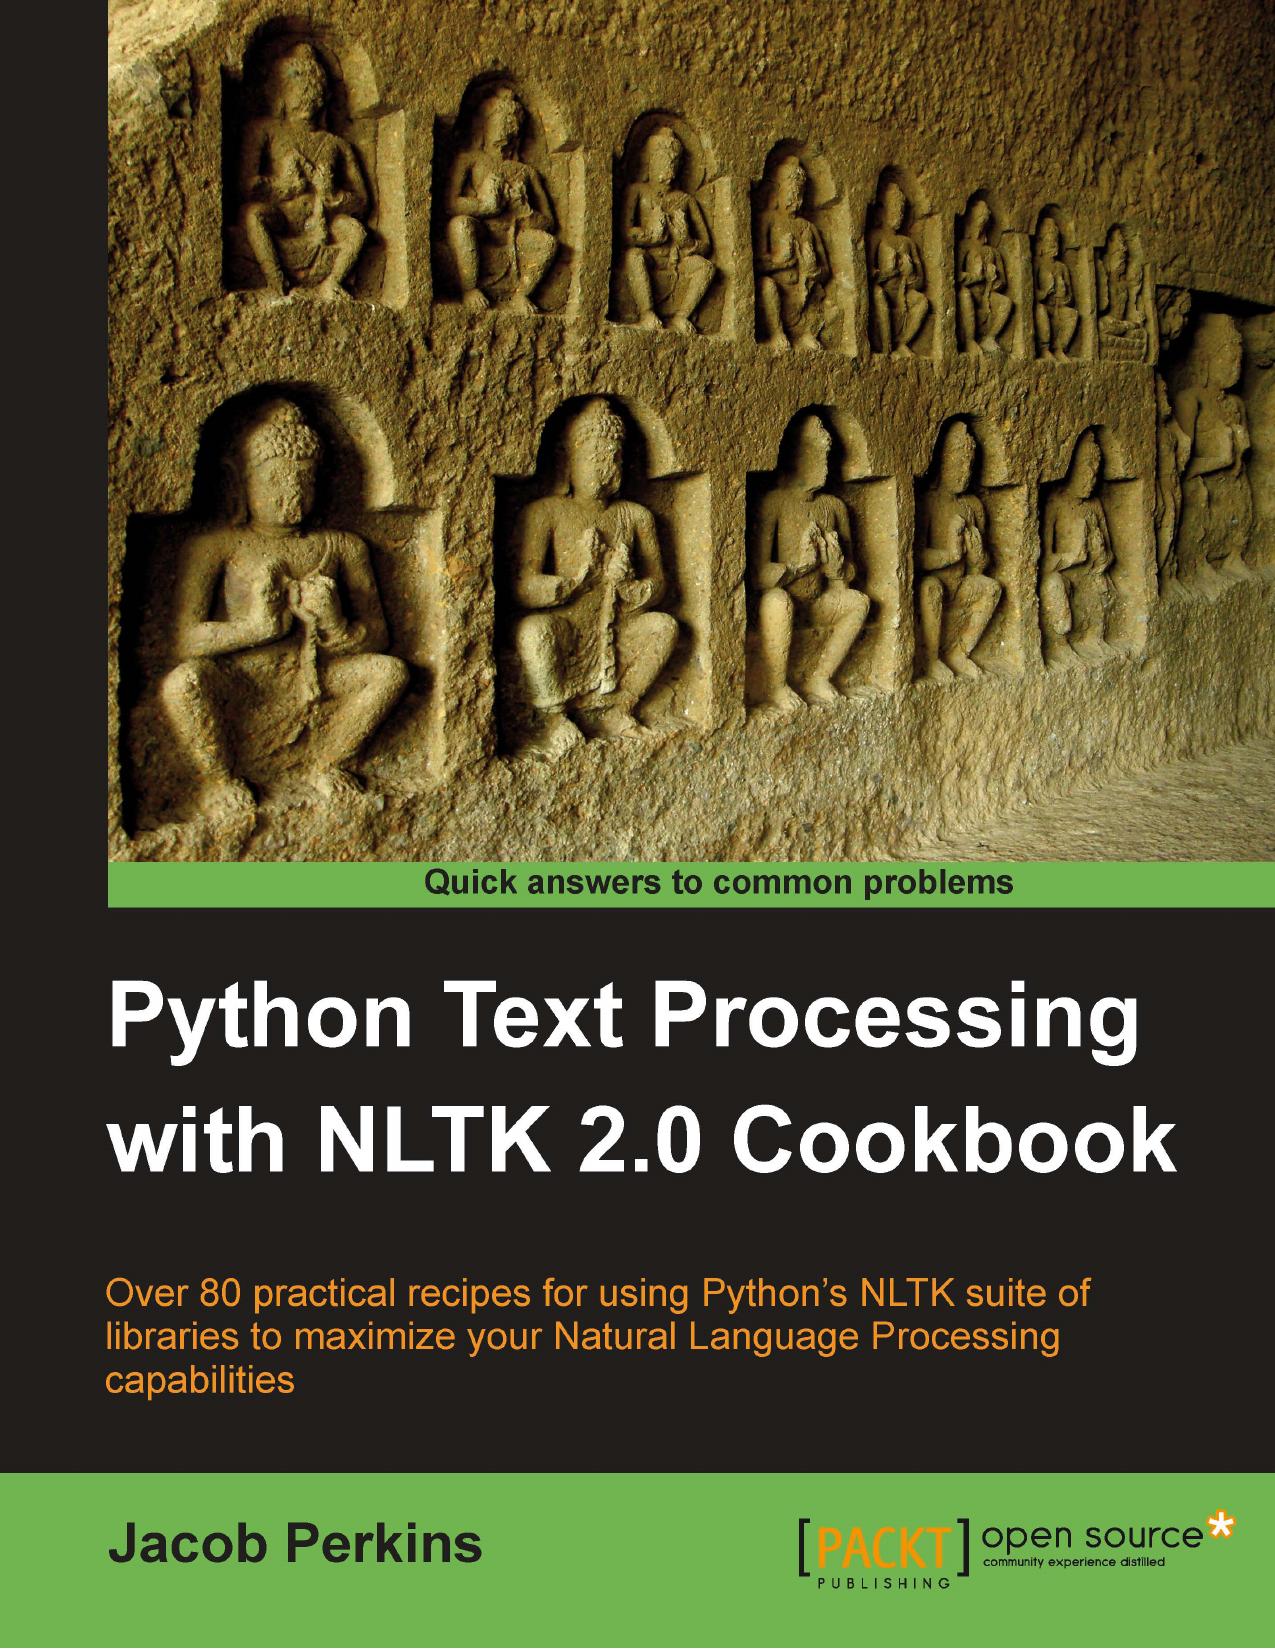 Python Text Processing with NLTK 2.0 Cookbook by Jacob Perkins